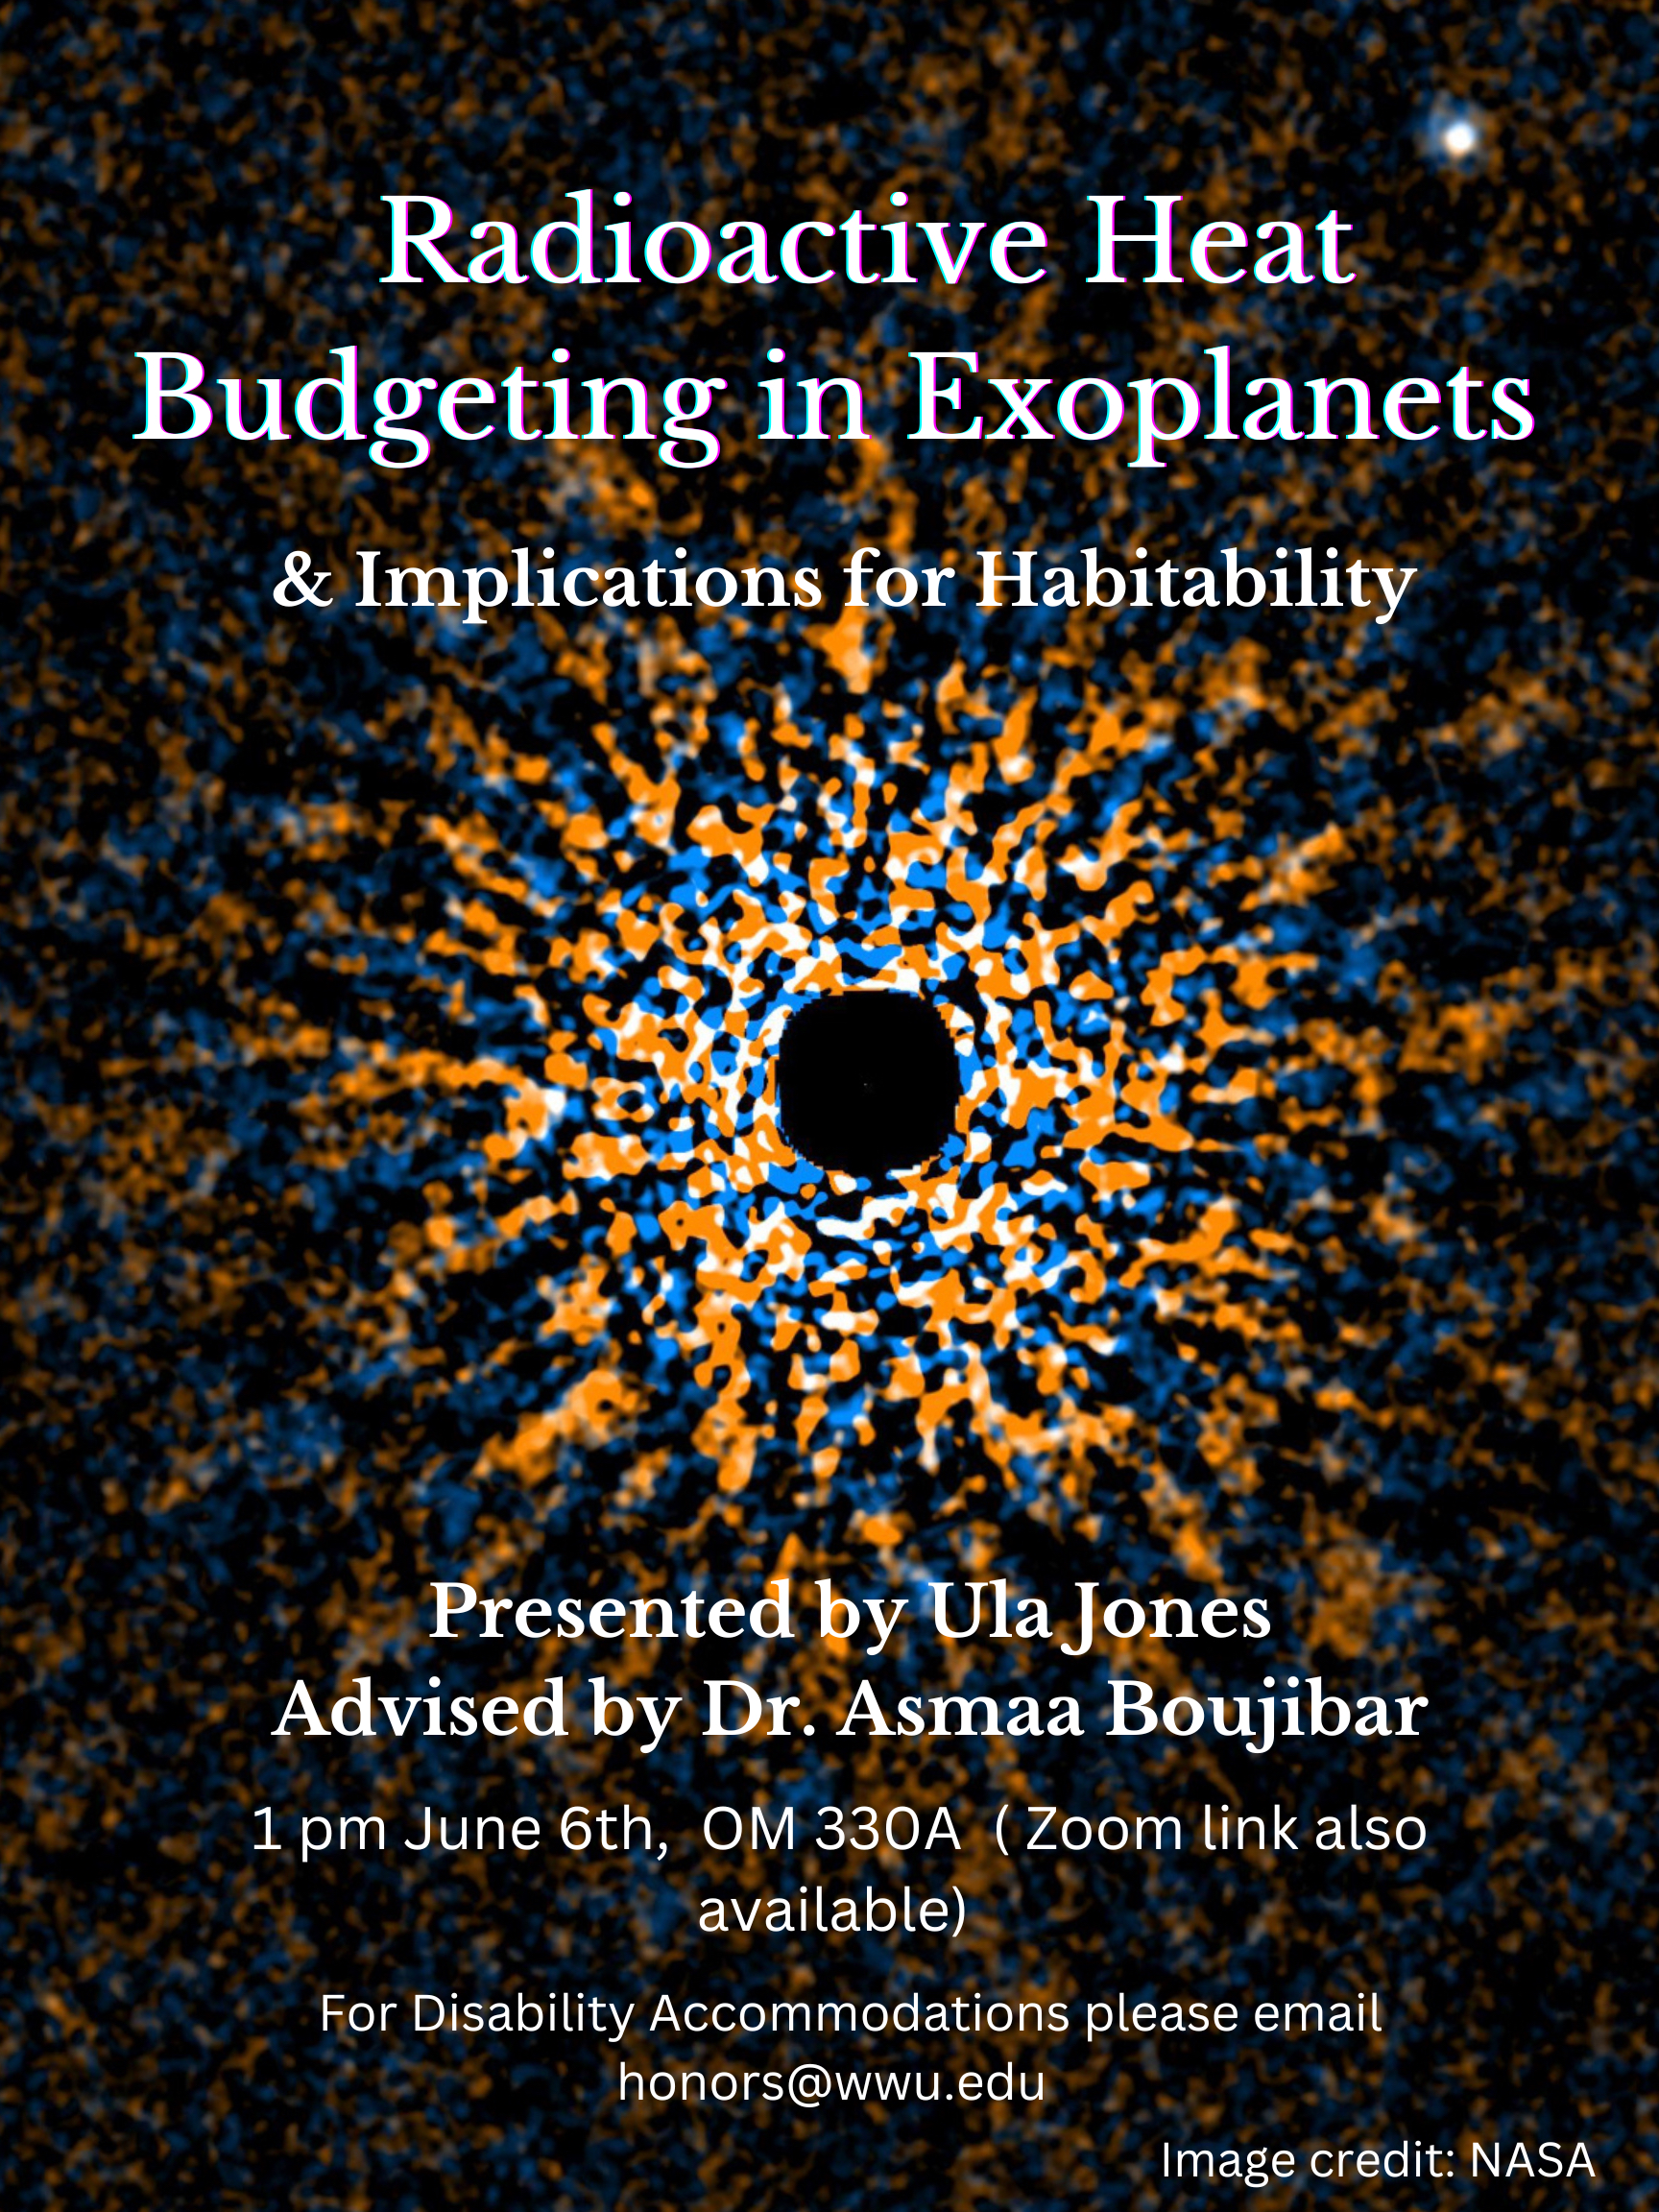 A flier with a heavily processed NASA Subaru image of the star GJ 504 and its exoplanet GJ 504b, which is visible as a bright spot in the top right. Text reads “Radioactive Heat Budgeting in Exoplanets & Implications for Habitability. Presented by Ula Jones - Advised by Dr. Asmaa Boujibar - 1 pm June 6th, OM 330A - (Zoom link also available) - For Disability Accommodations please email - honors@wwu.edu - Image credit: NASA”. 